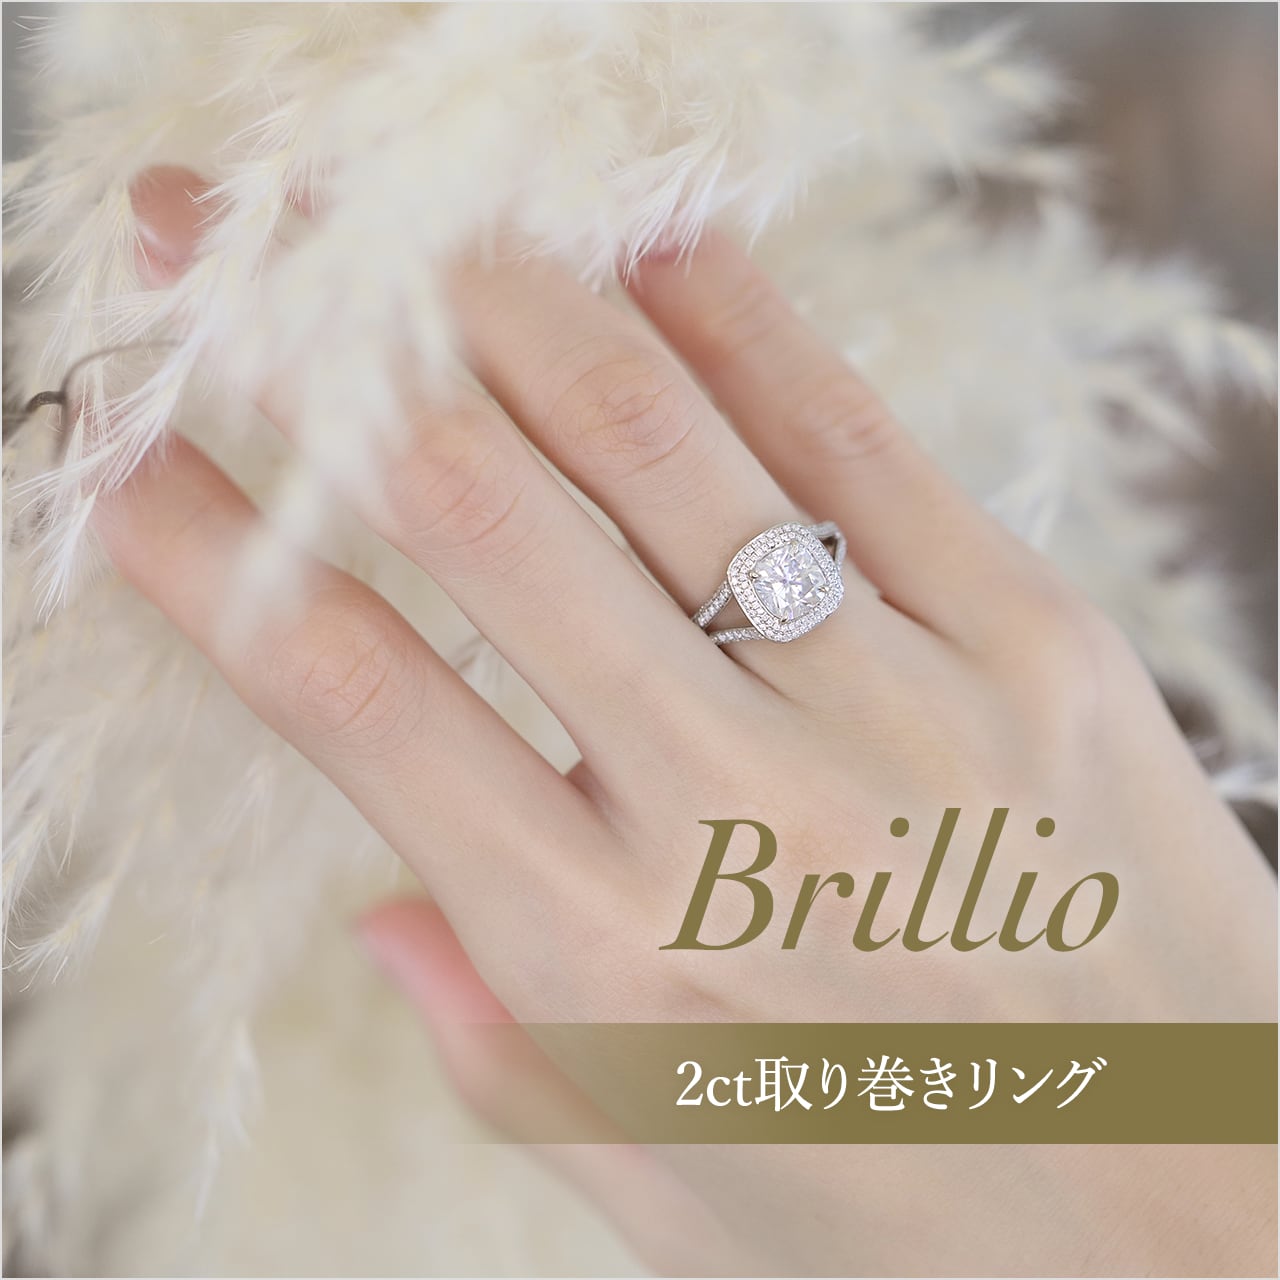 Brillio 2ct モアサナイト取り巻きリング | MARRAN powered by BASE